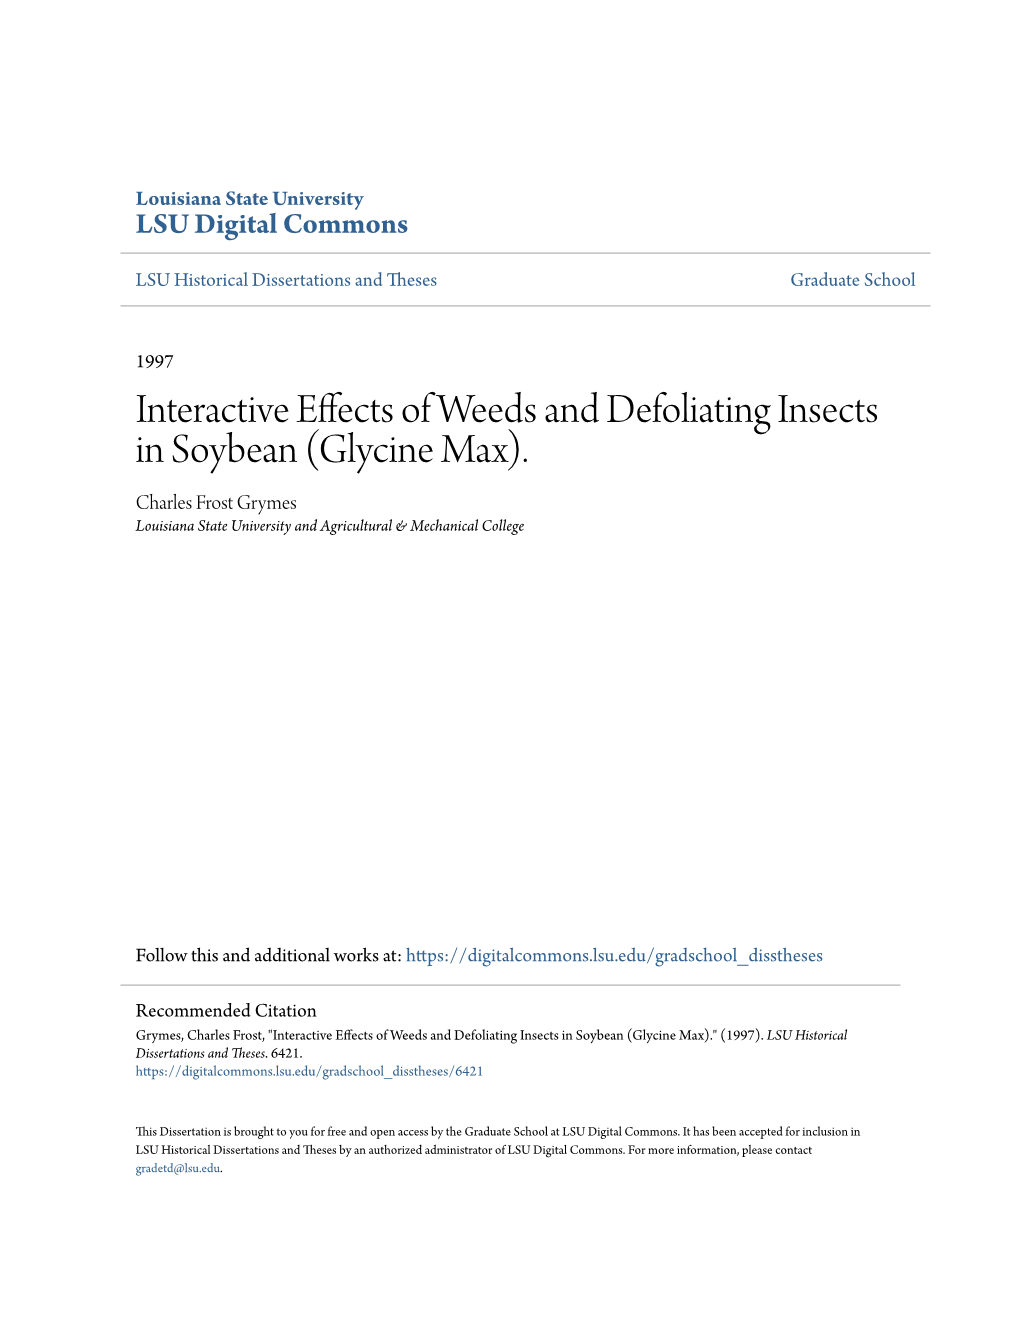 Interactive Effects of Weeds and Defoliating Insects in Soybean (Glycine Max)